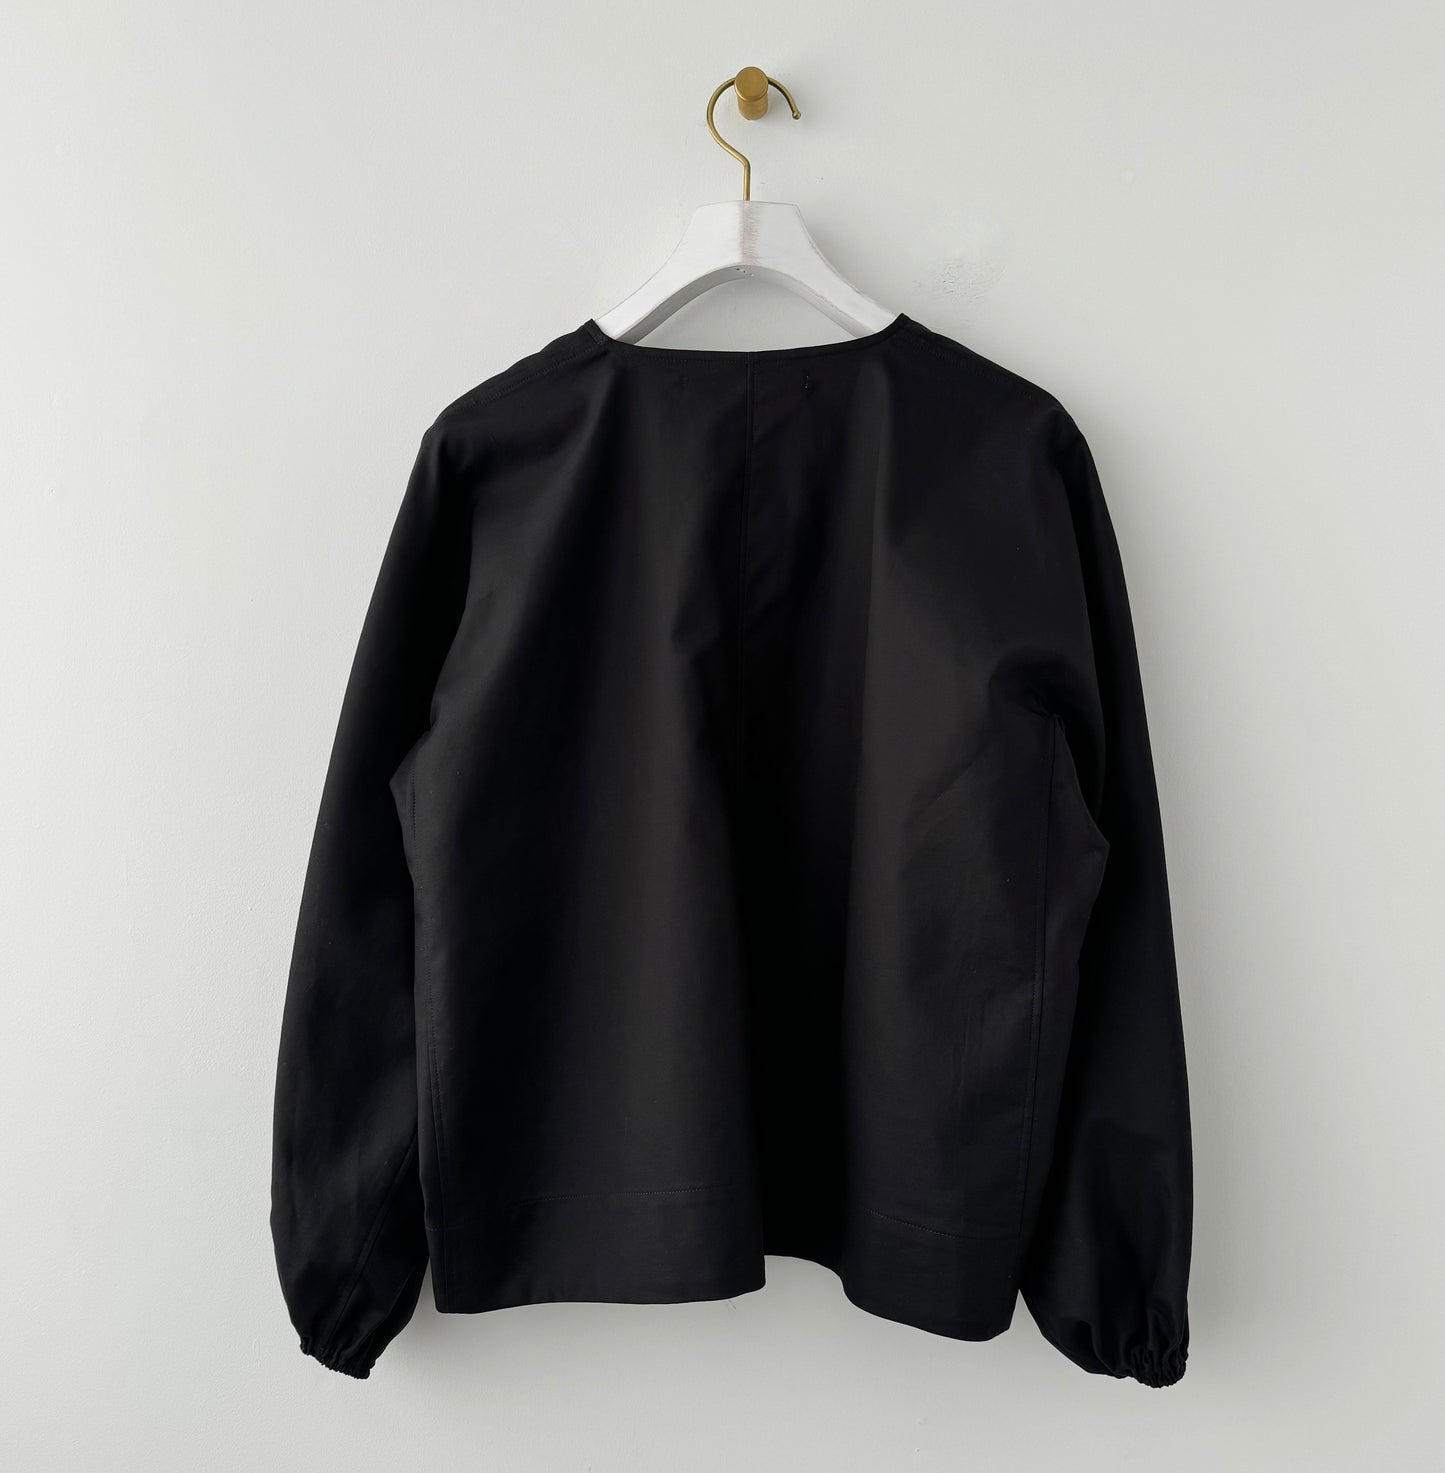 Volume sleeve pull-over (BLACK)　TENNE HANDCRAFTED MODERN ブラウス　通販　取扱店